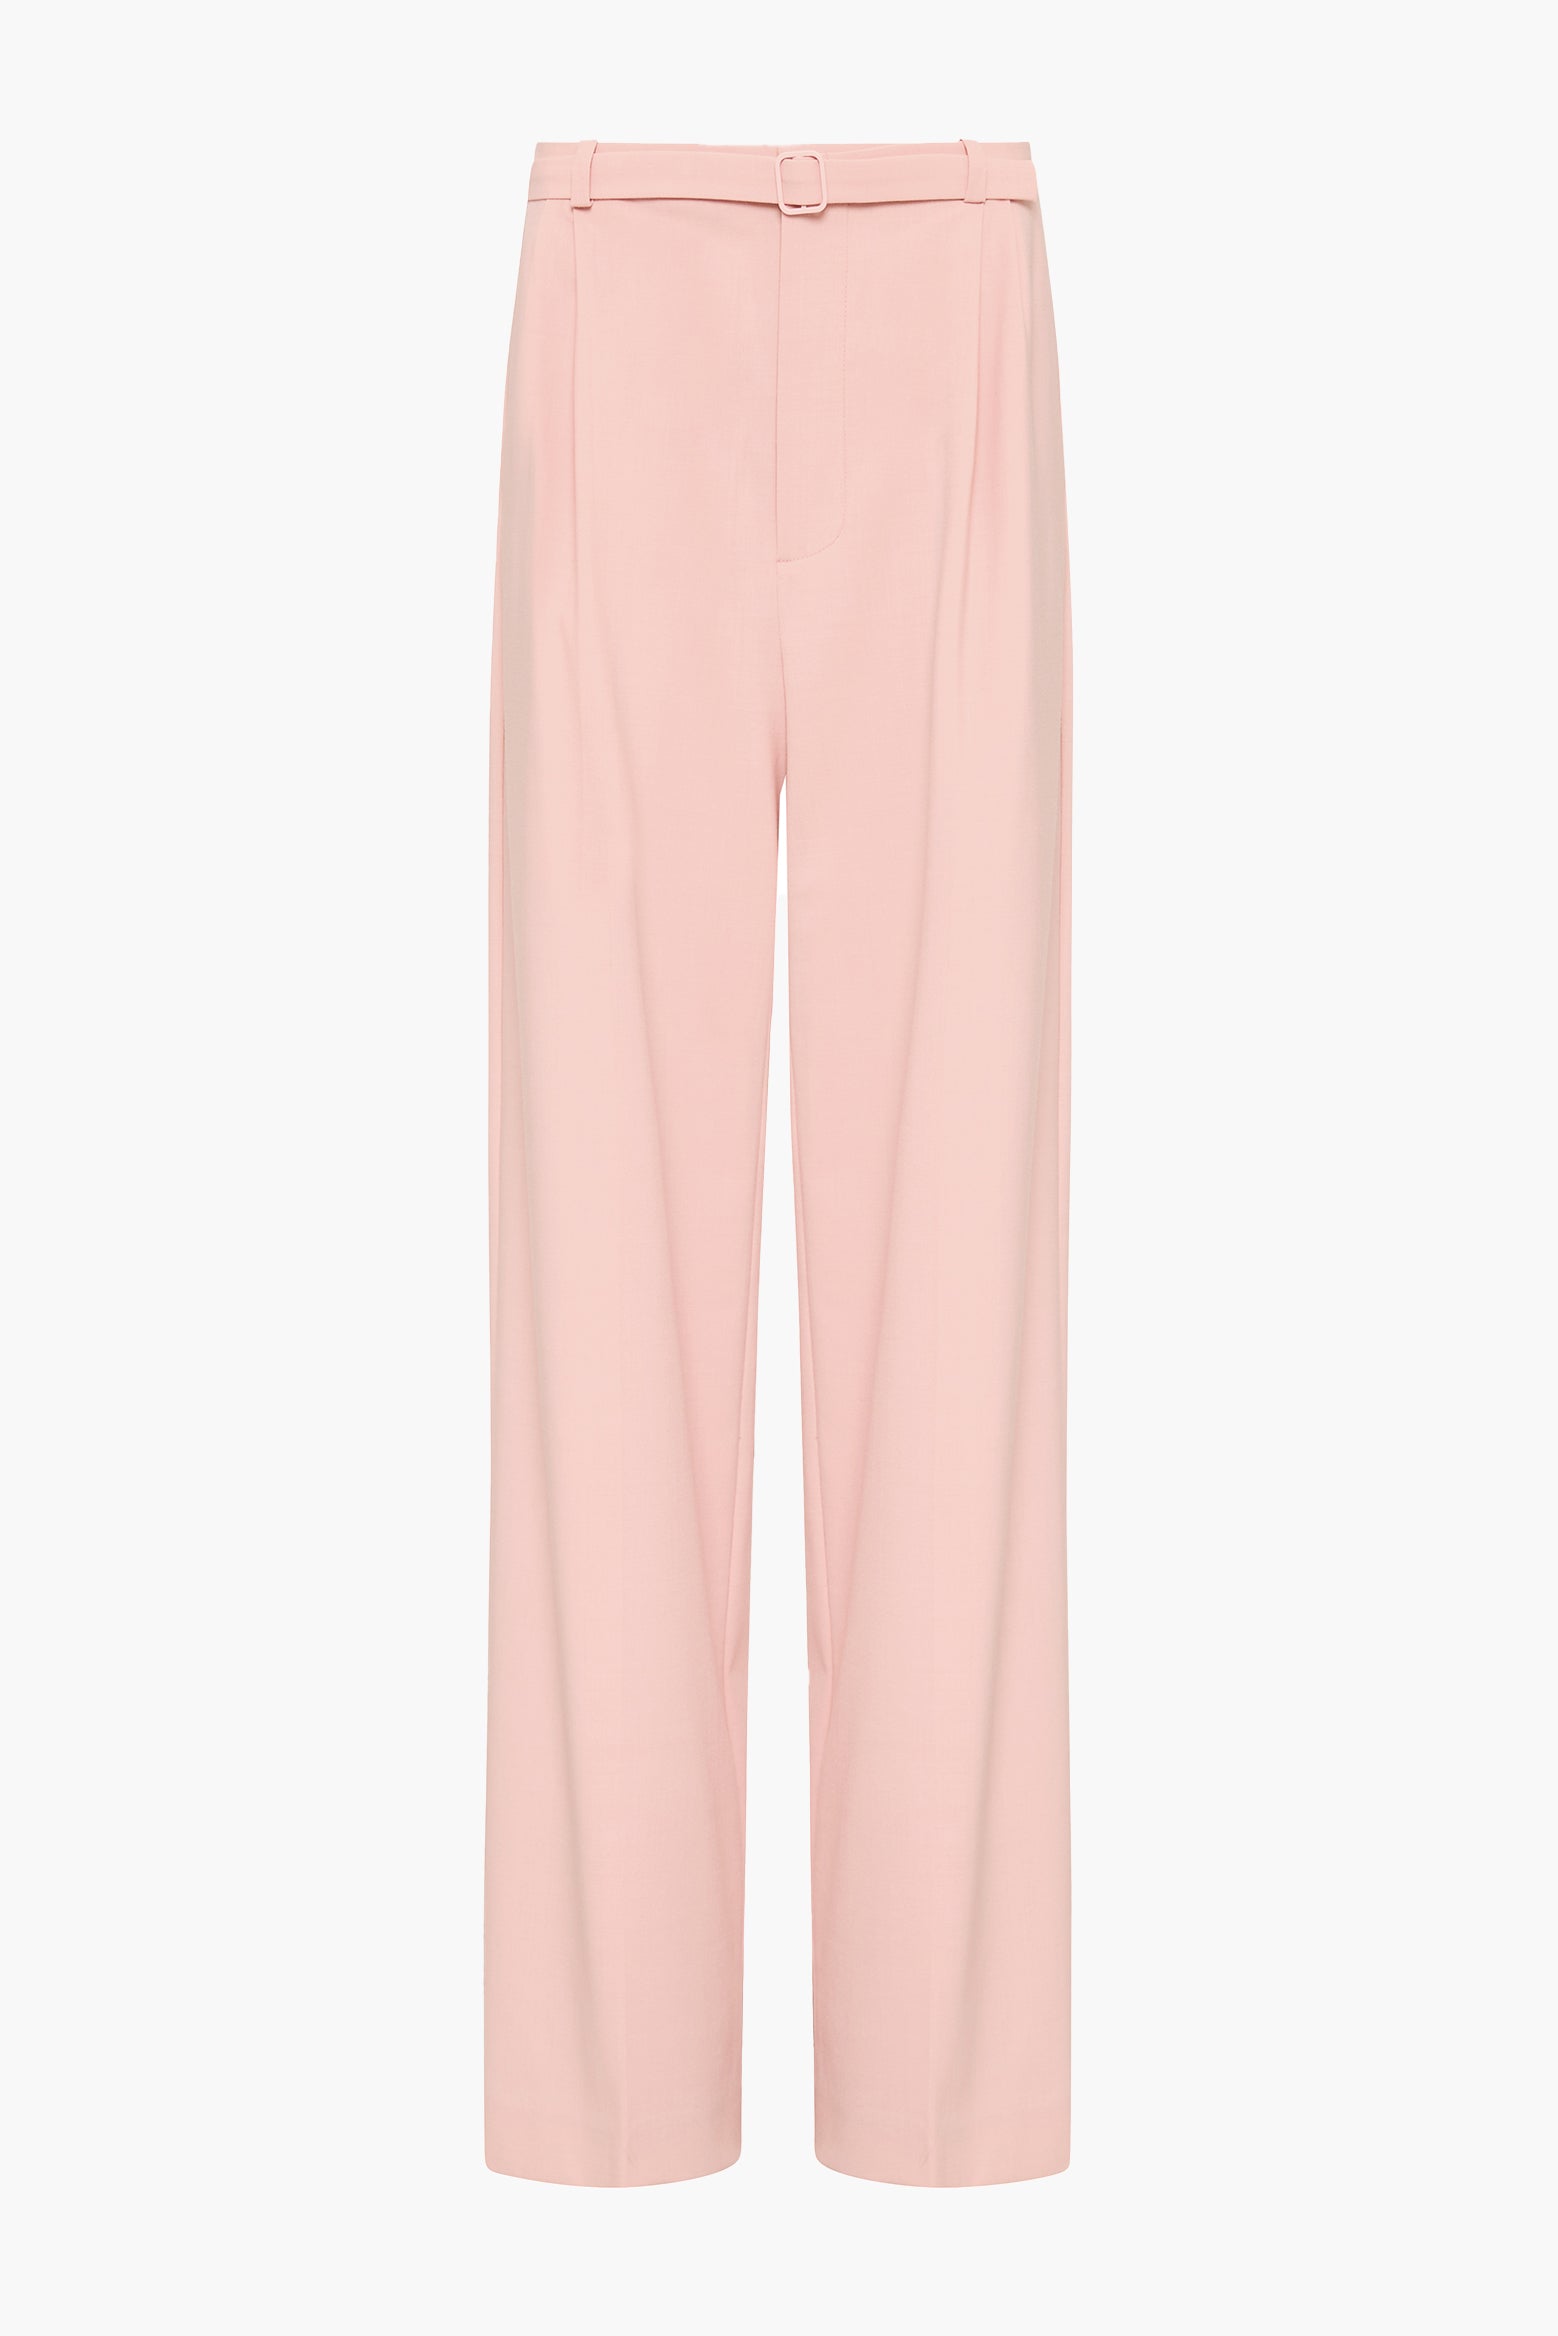 SIR. Dario Trouser in Pink available at The New Trend.